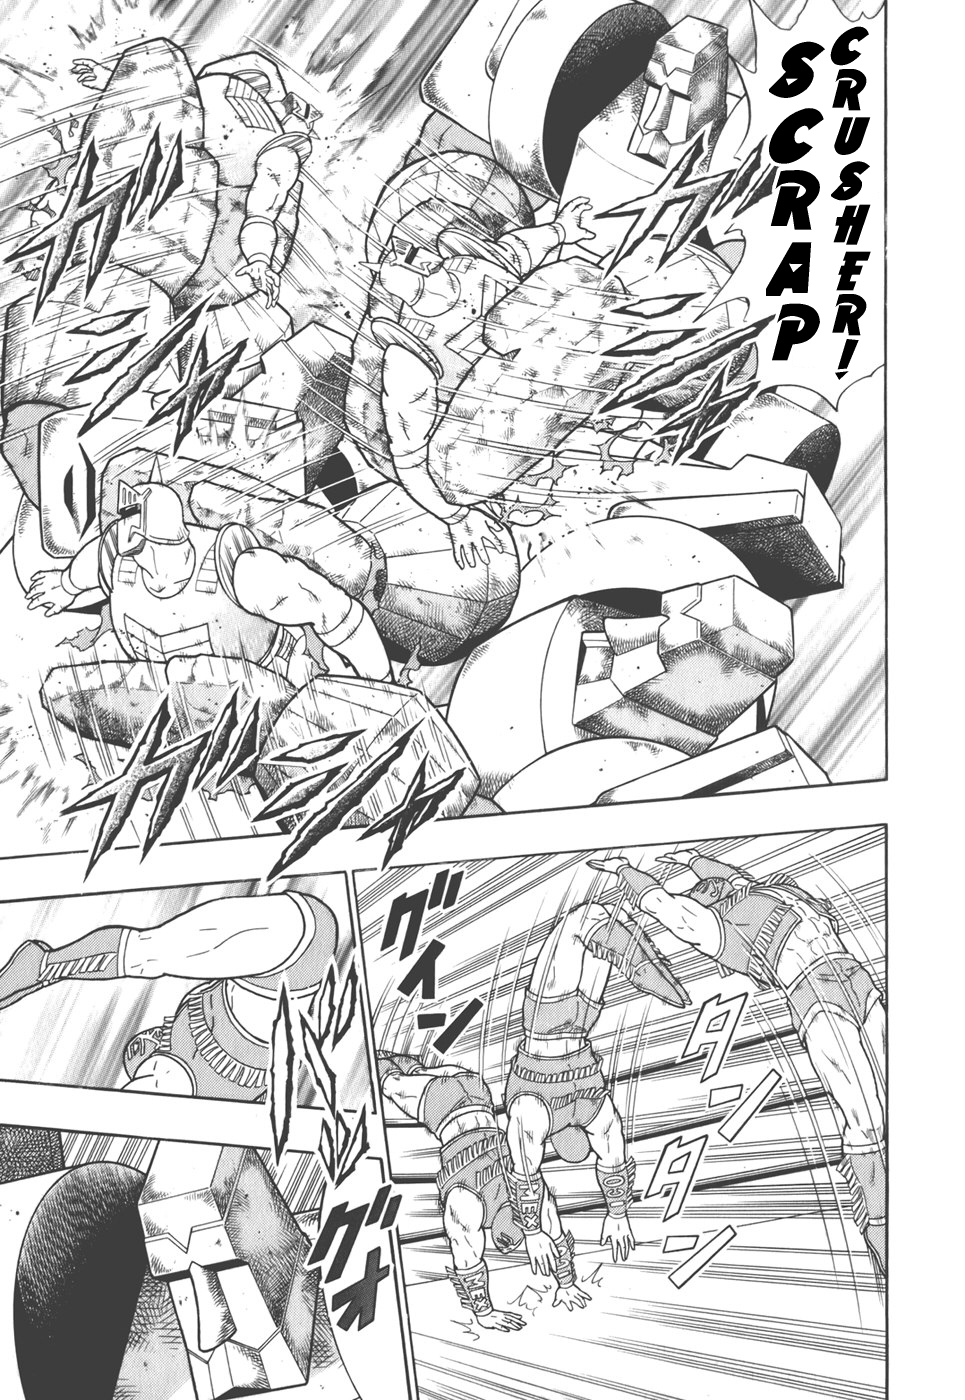 Kinnikuman Nisei: Ultimate Choujin Tag Vol. 4 Ch. 37 A New Generation United Front to Save Kevin!